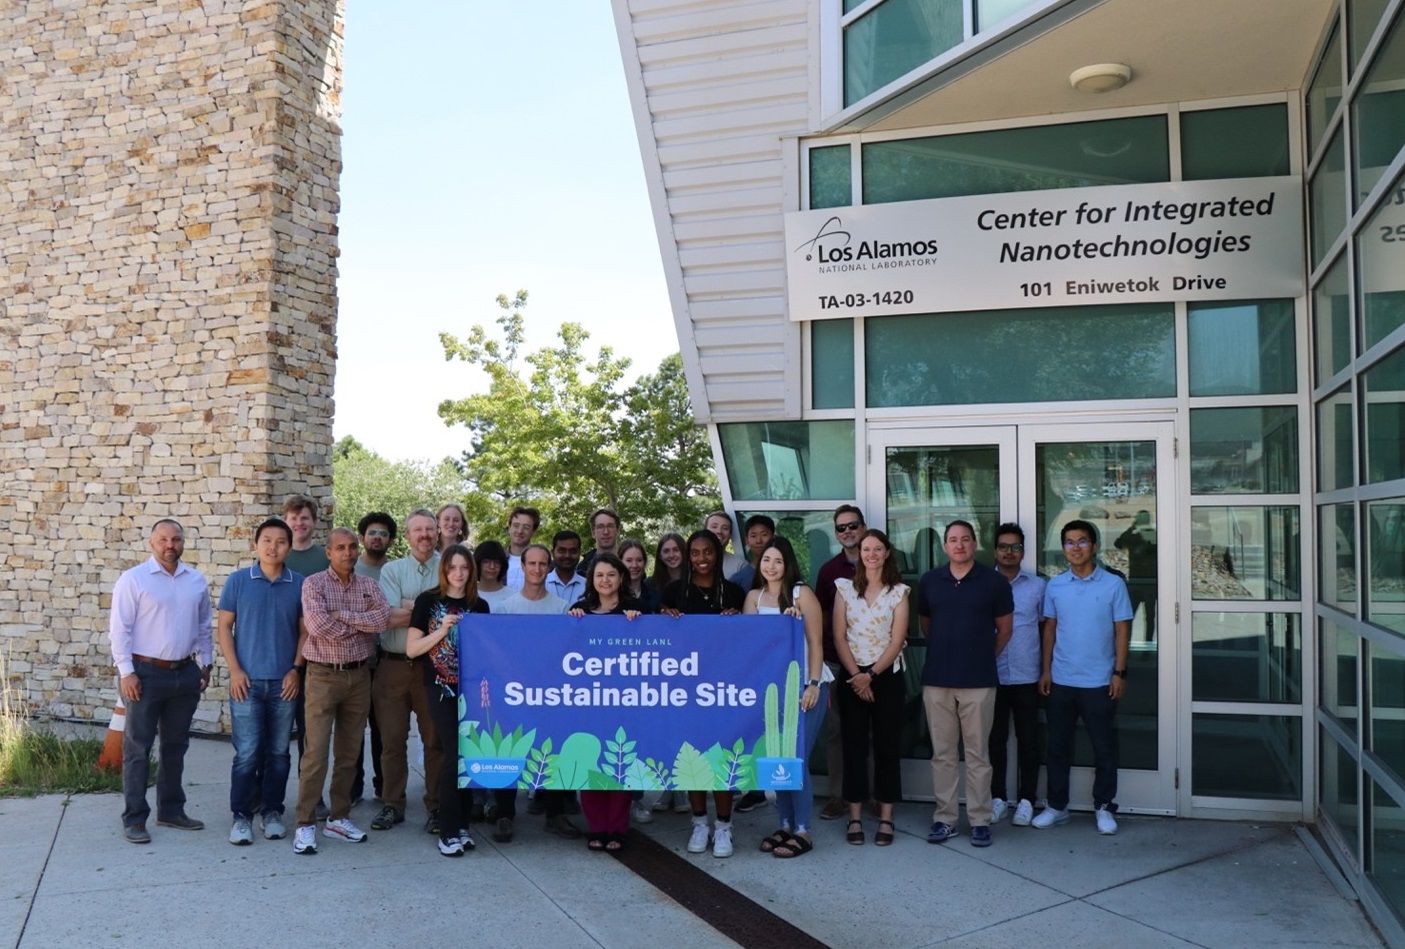 Members of the Center for Integrated Nanotechnologies with the banner proclaiming the center’s “My Green LANL” certification